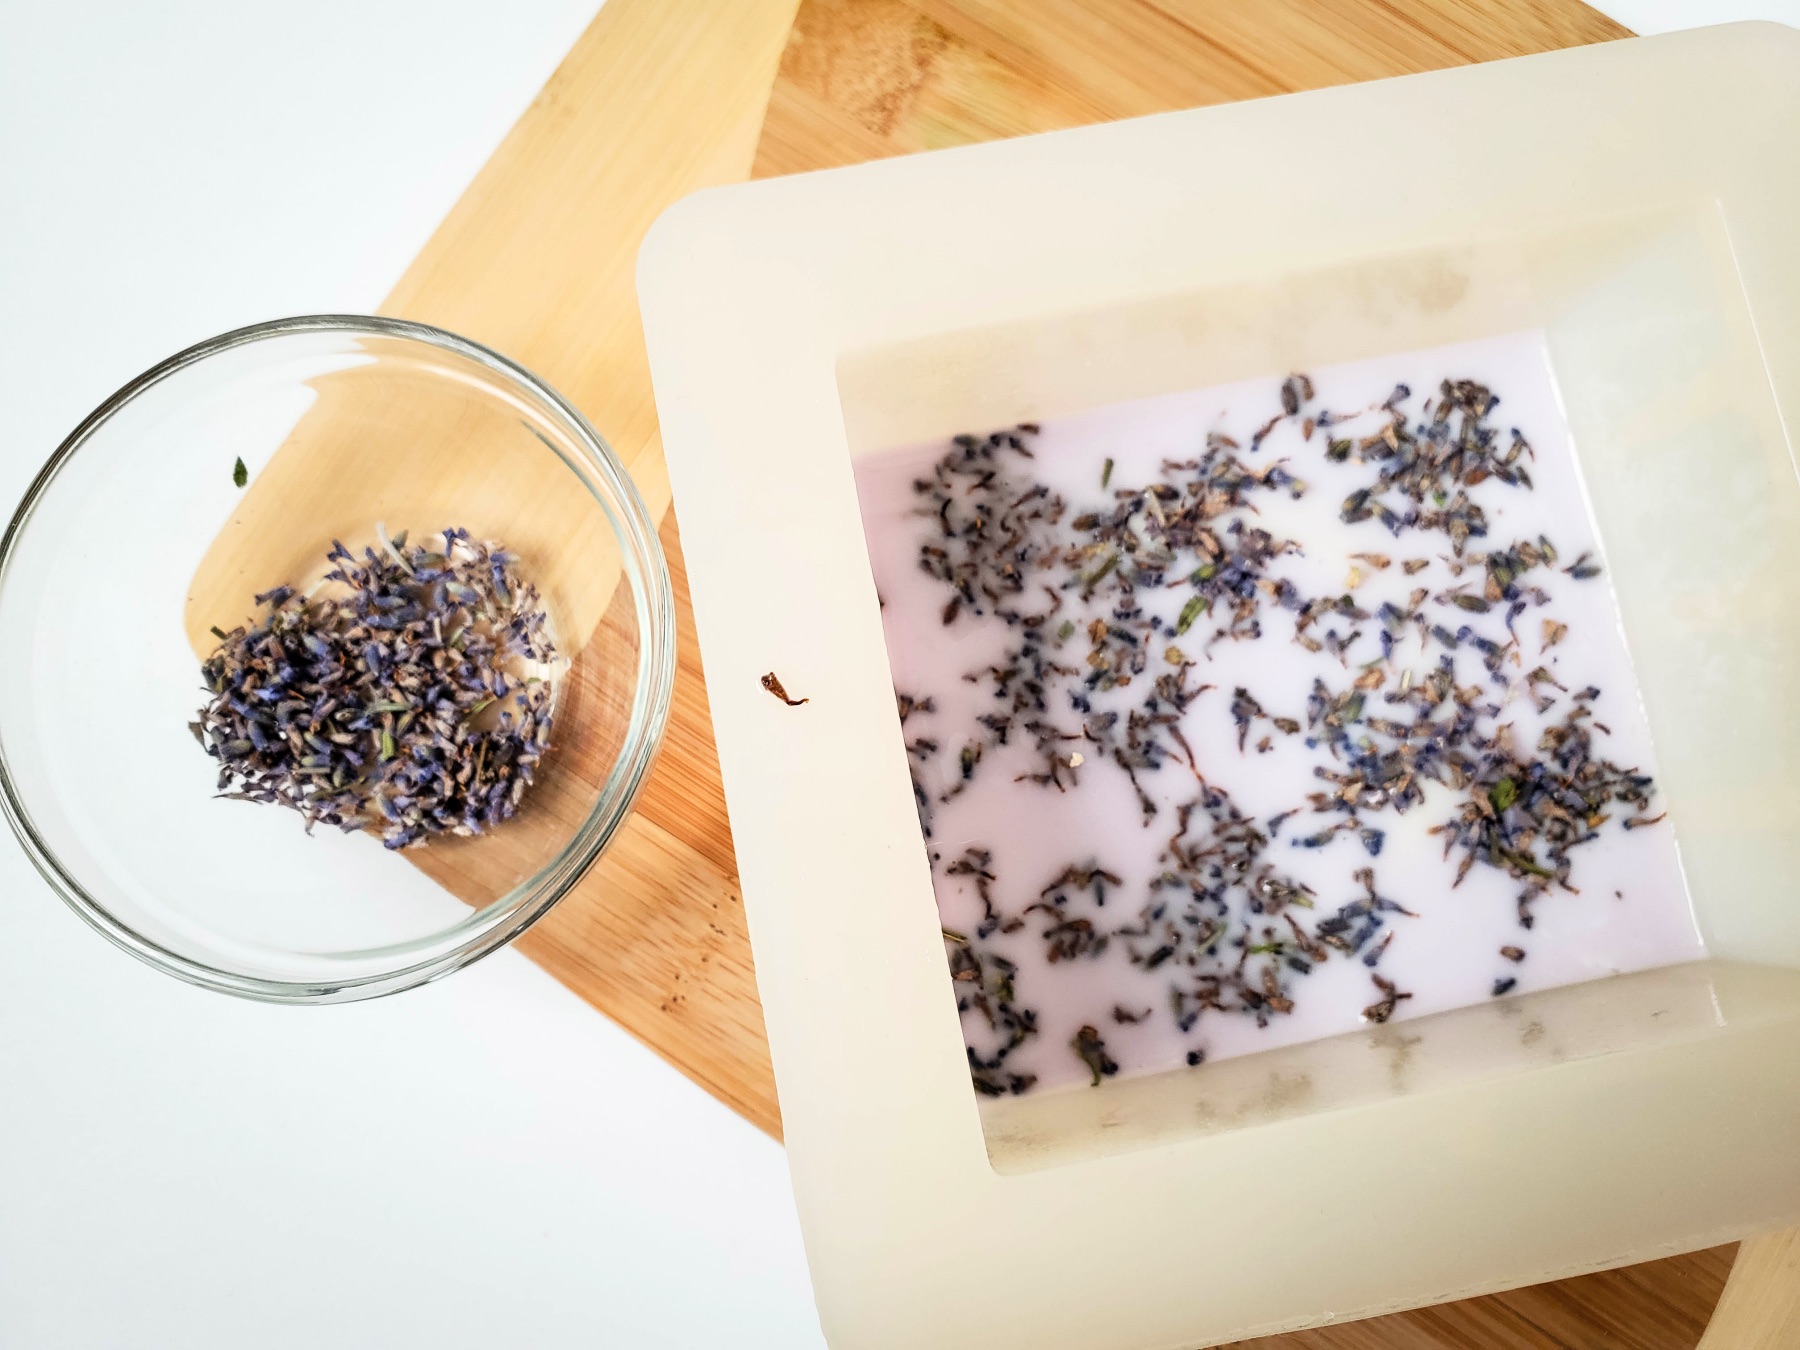 sprinkle the lavender soap layer with lavender buds